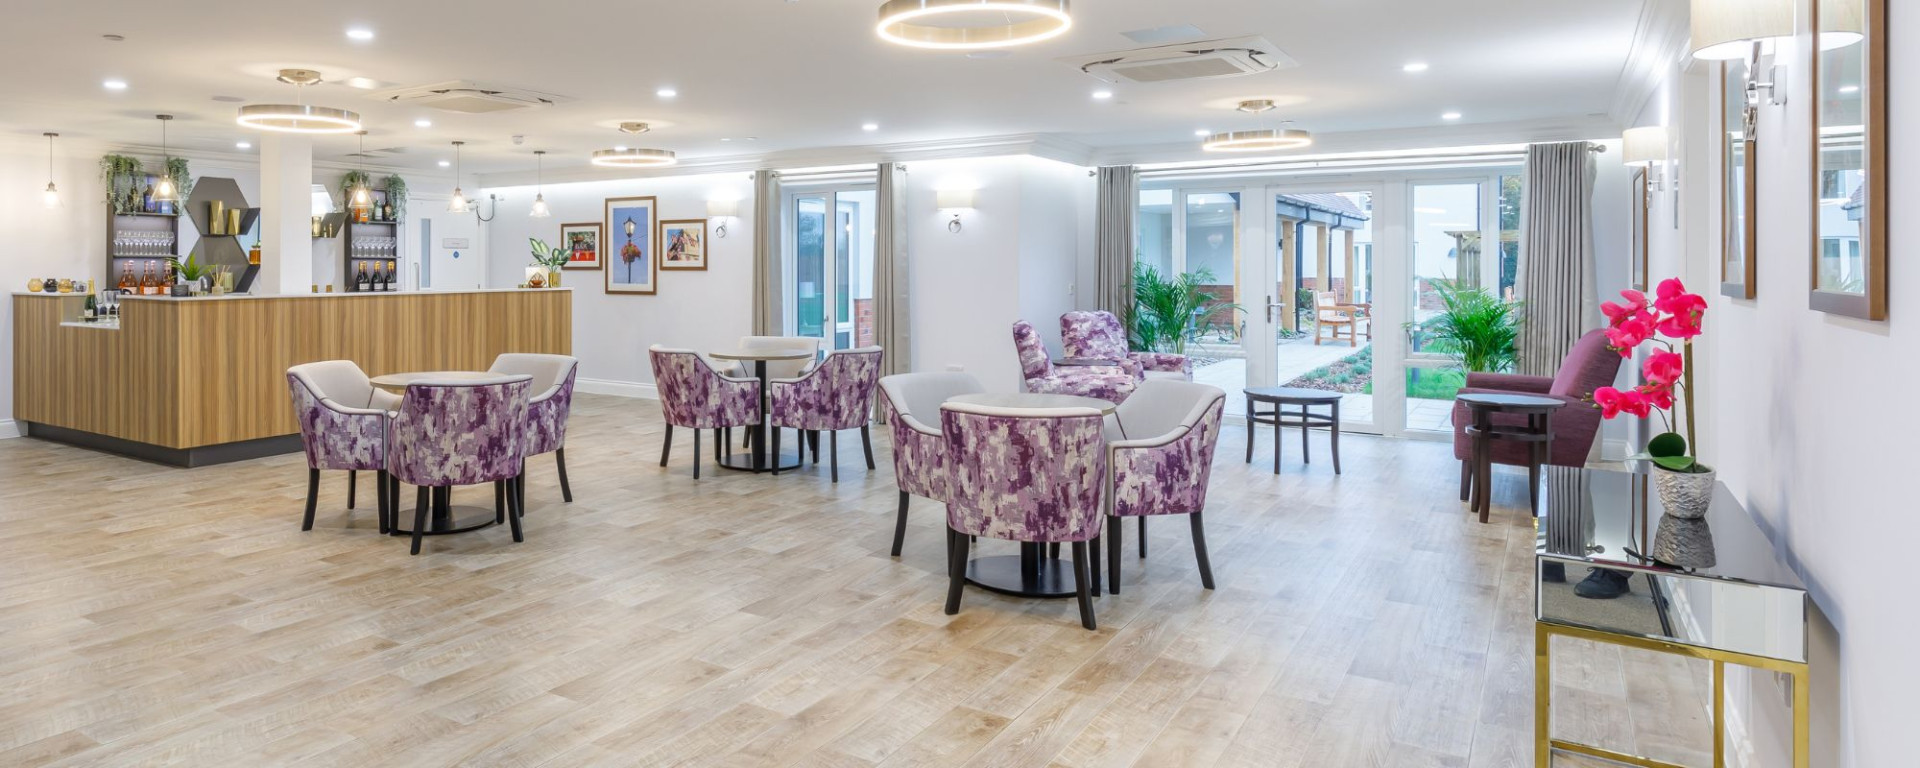 Bespoke Care Home Furniture and Interiors